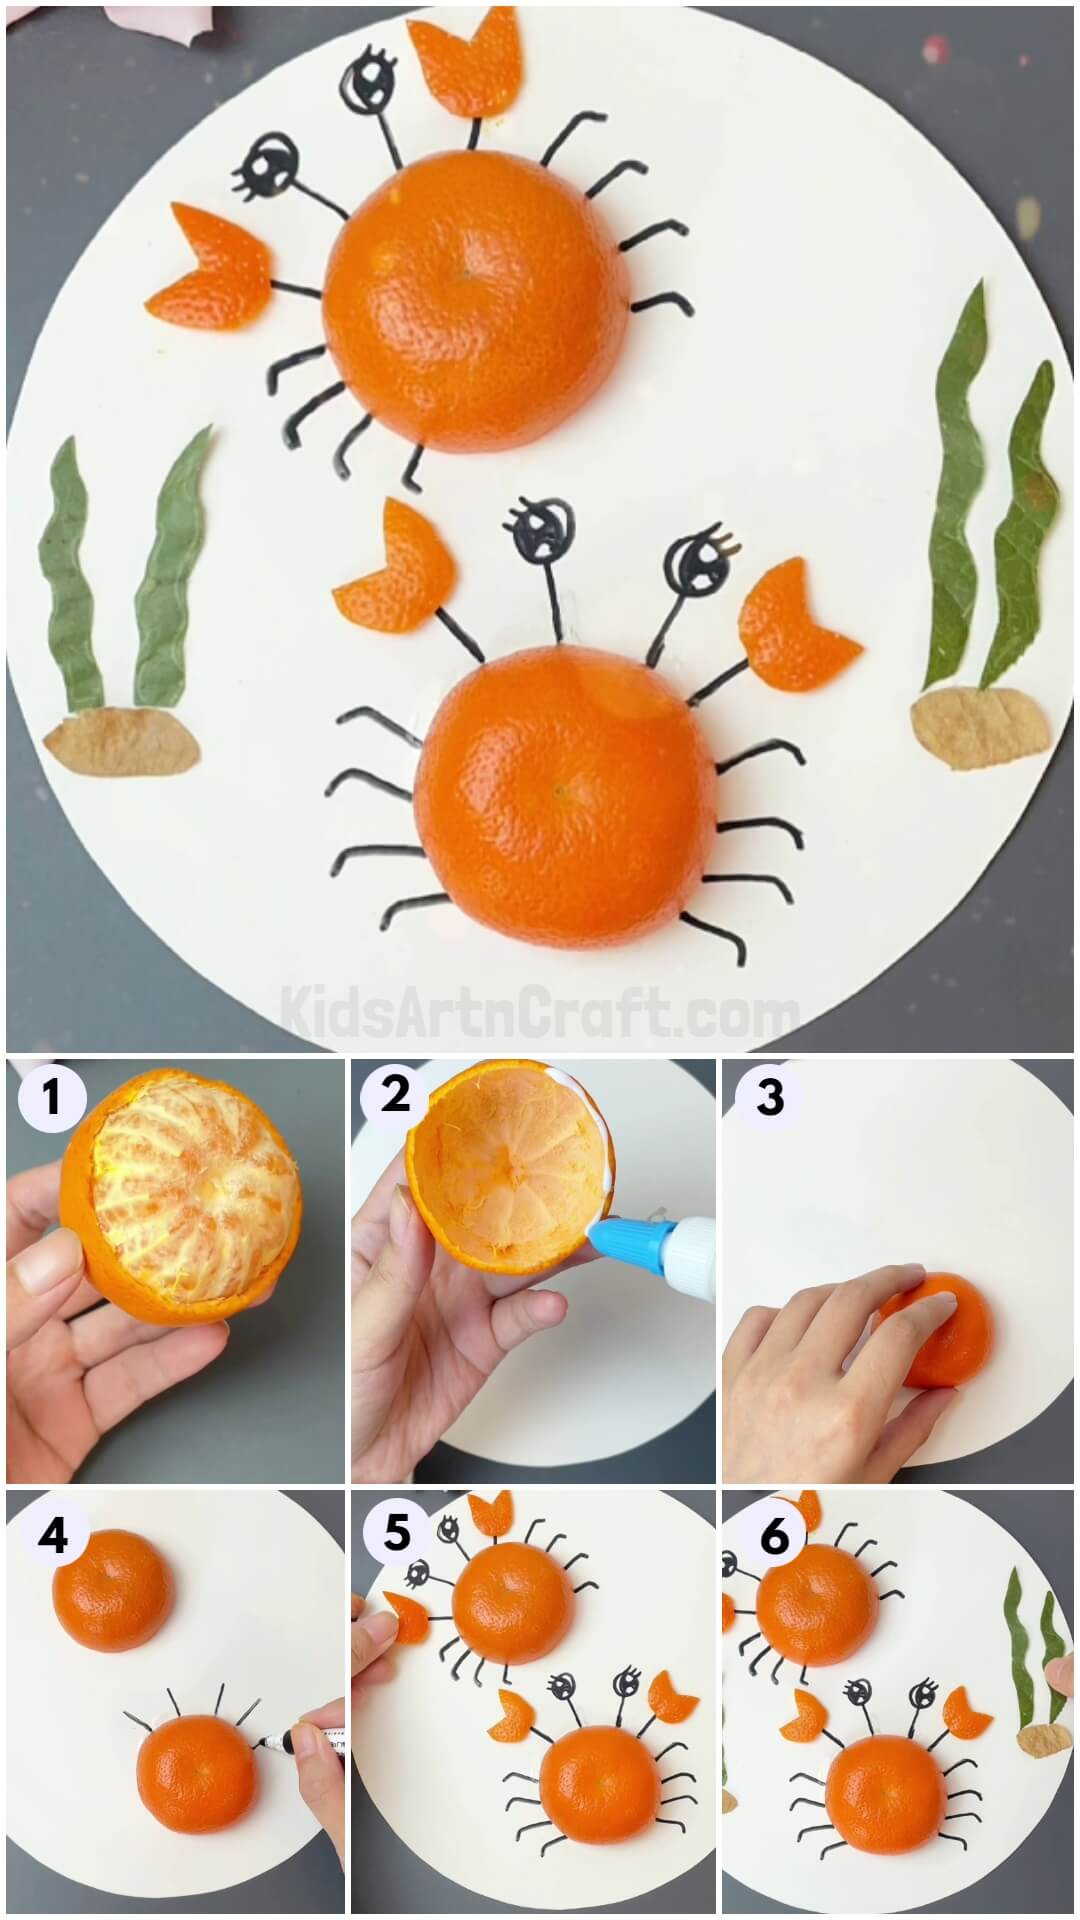 Learn To Make Crab Craft Tutorial Using Orange Peel And Leaves